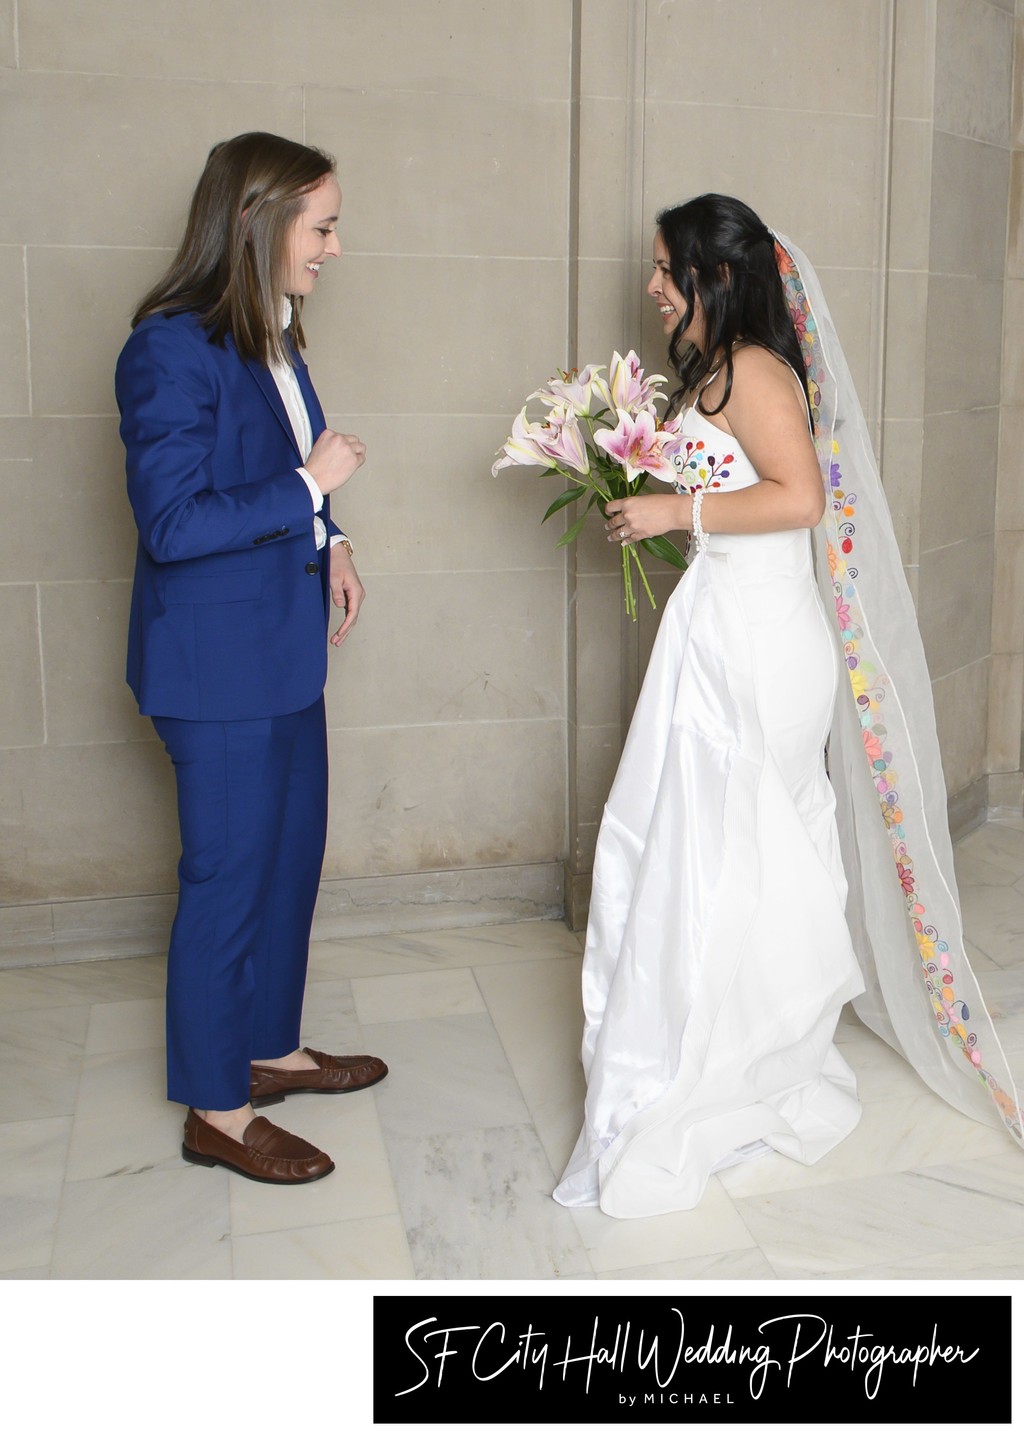 San Francisco city hall wedding photography - First Look at LGBTQ+ Marriage